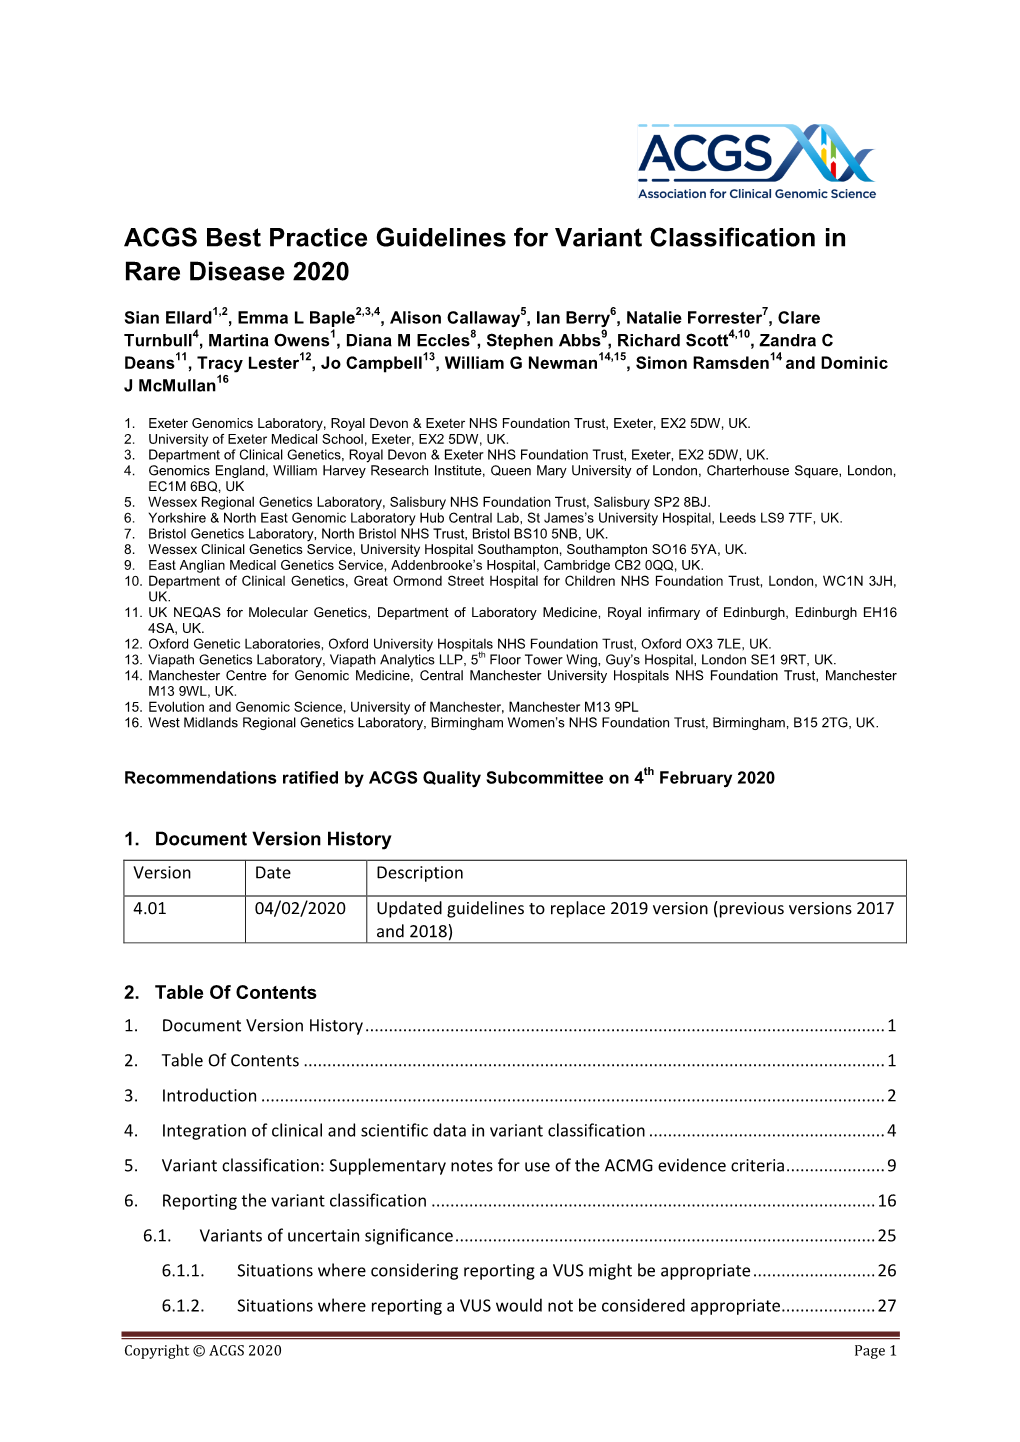 ACGS Best Practice Guidelines for Variant Classification in Rare Disease 2020